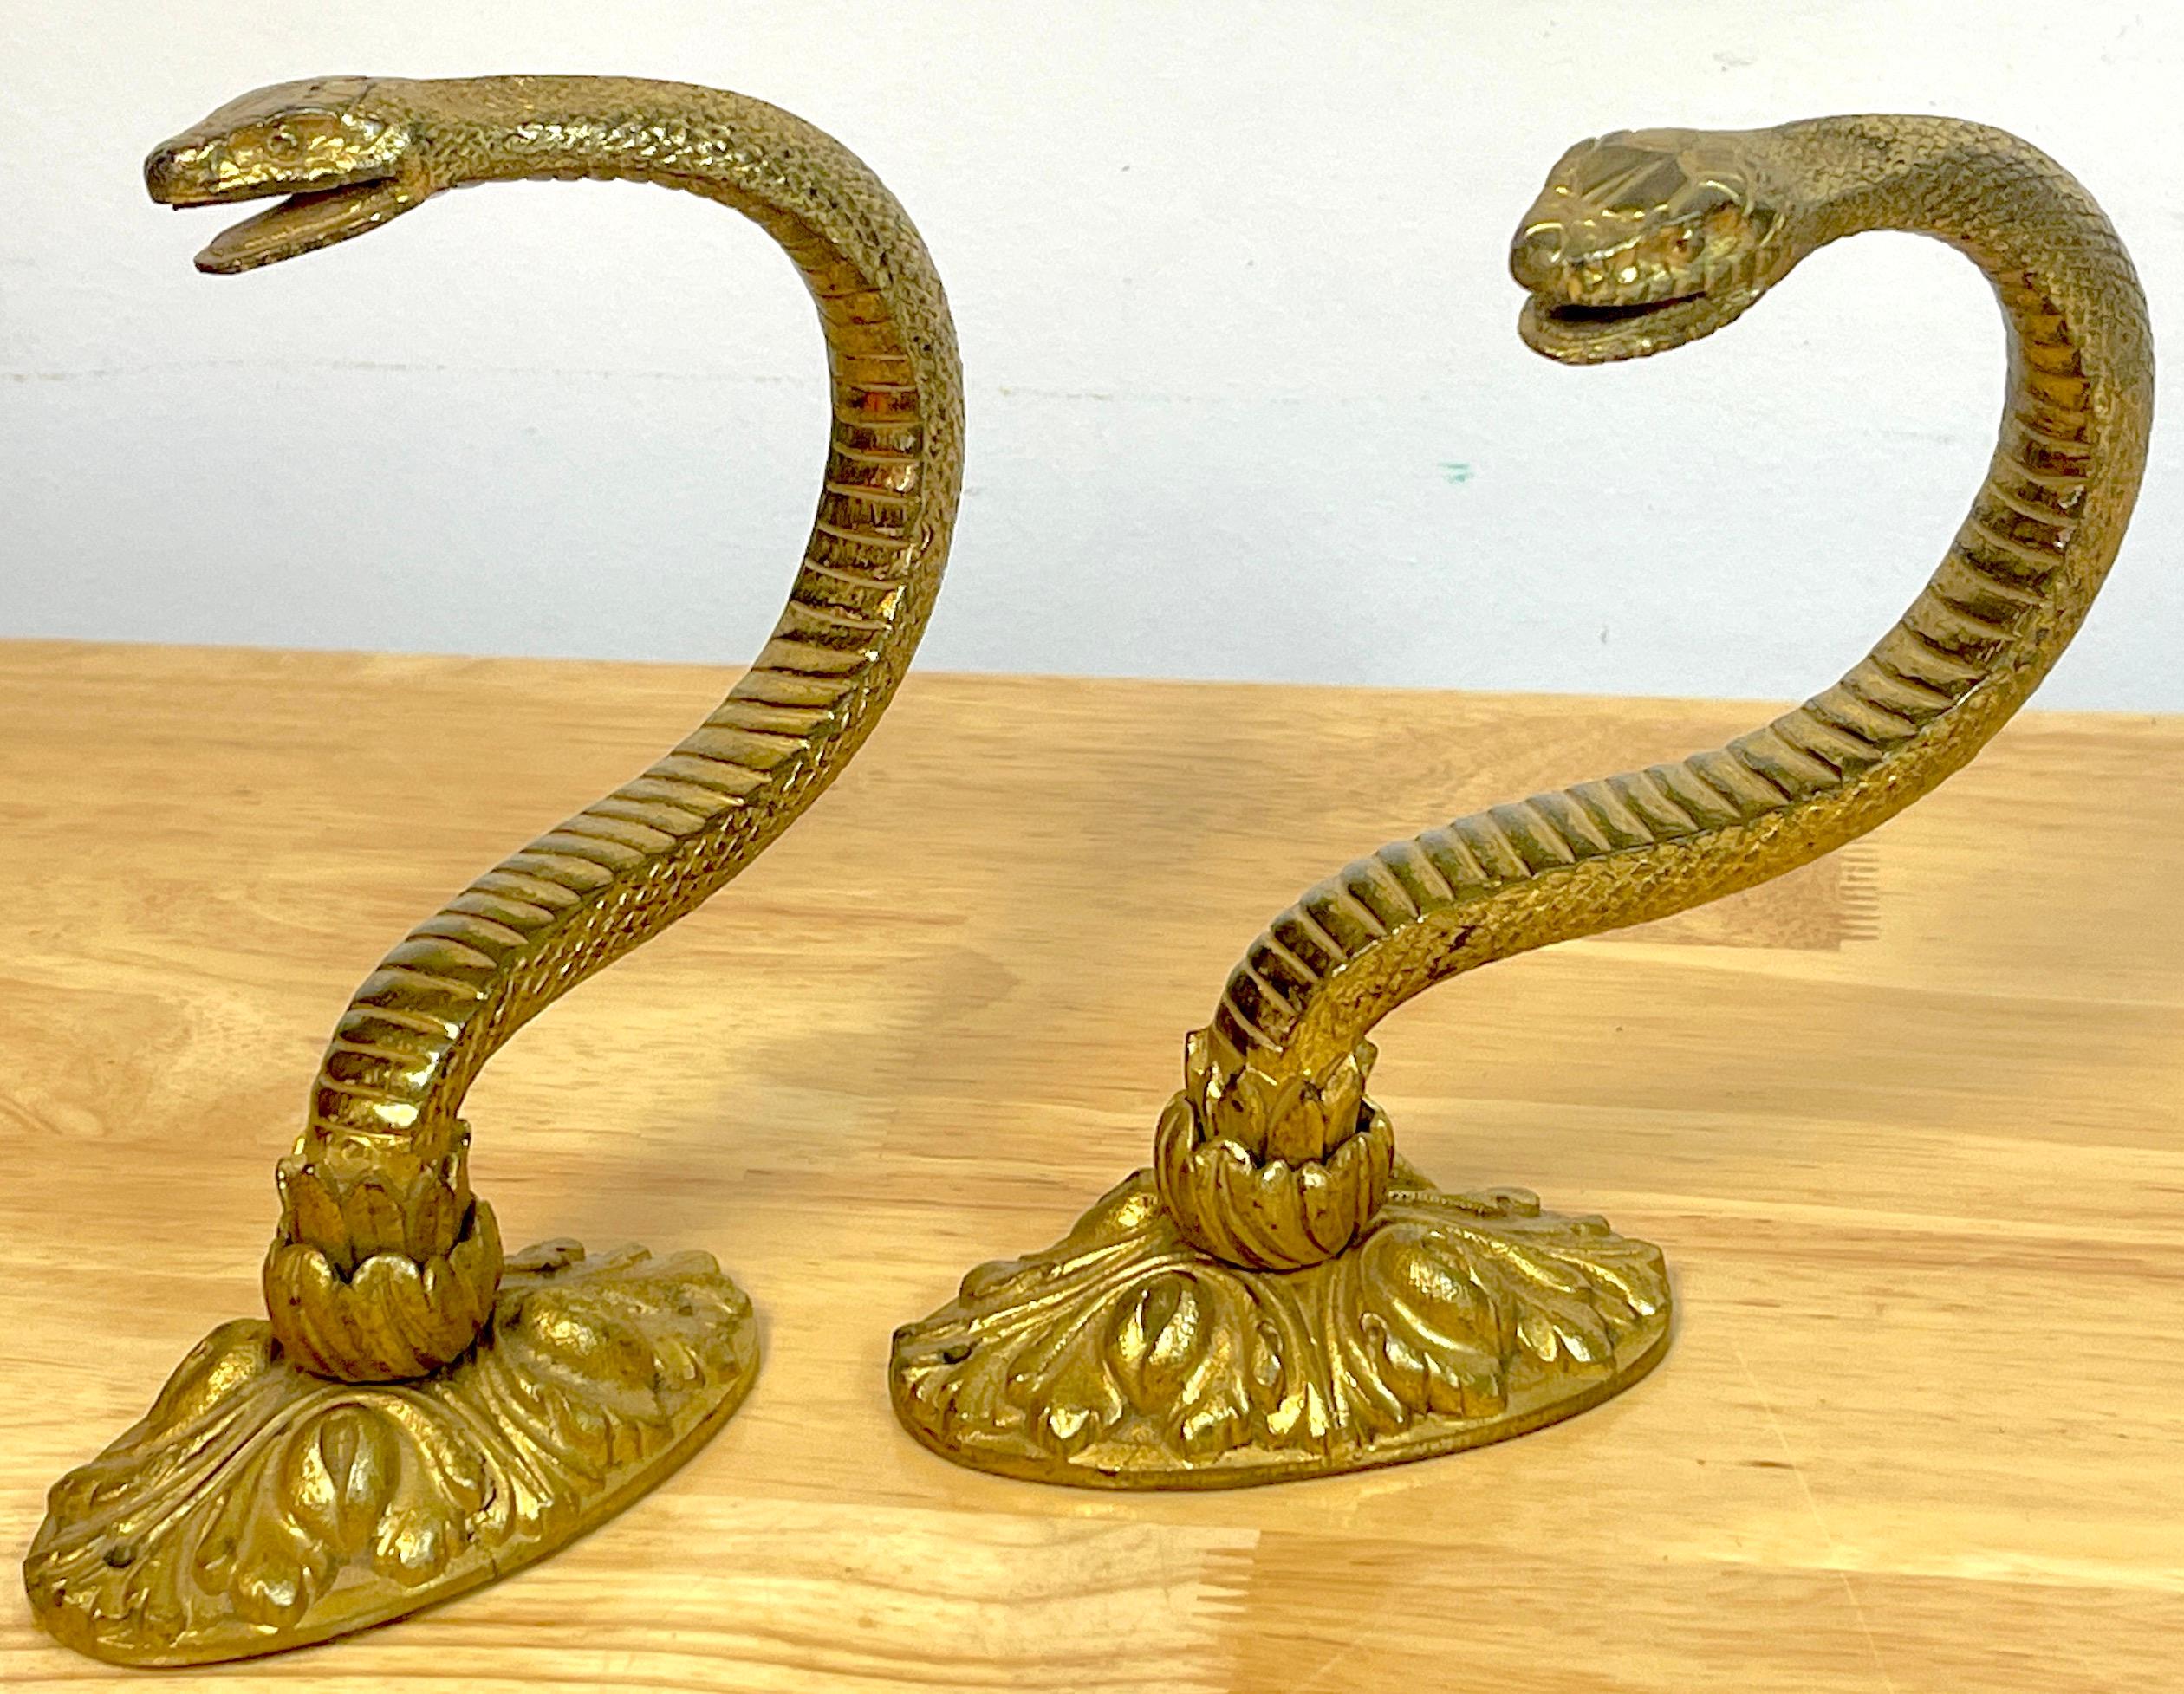 Pair of Napoleon III Ormolu Serpent handles, Signed 'P.D' Each one realistically cast and modeled a serpent, on a acanthus base, foundry stamped 'P.D'
Each handle measures 7